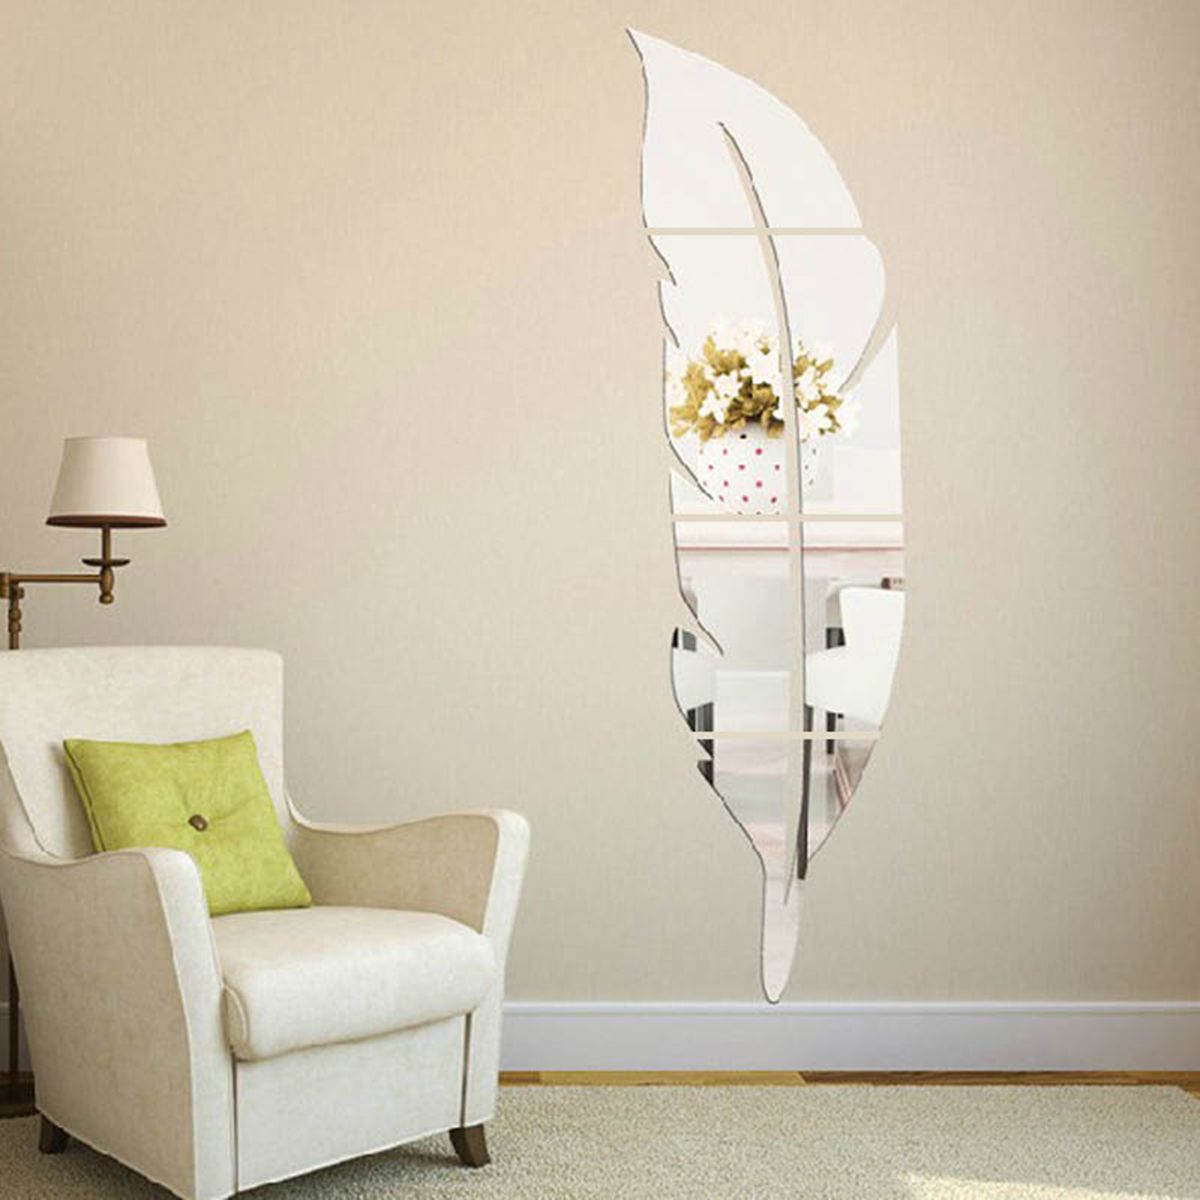 3D-Mirror-Vinyl-Feather-Wall-Sticker-Decal-DIY-Room-Art-Mural-Removable-Wall-Paper-Home-Decor-1153758